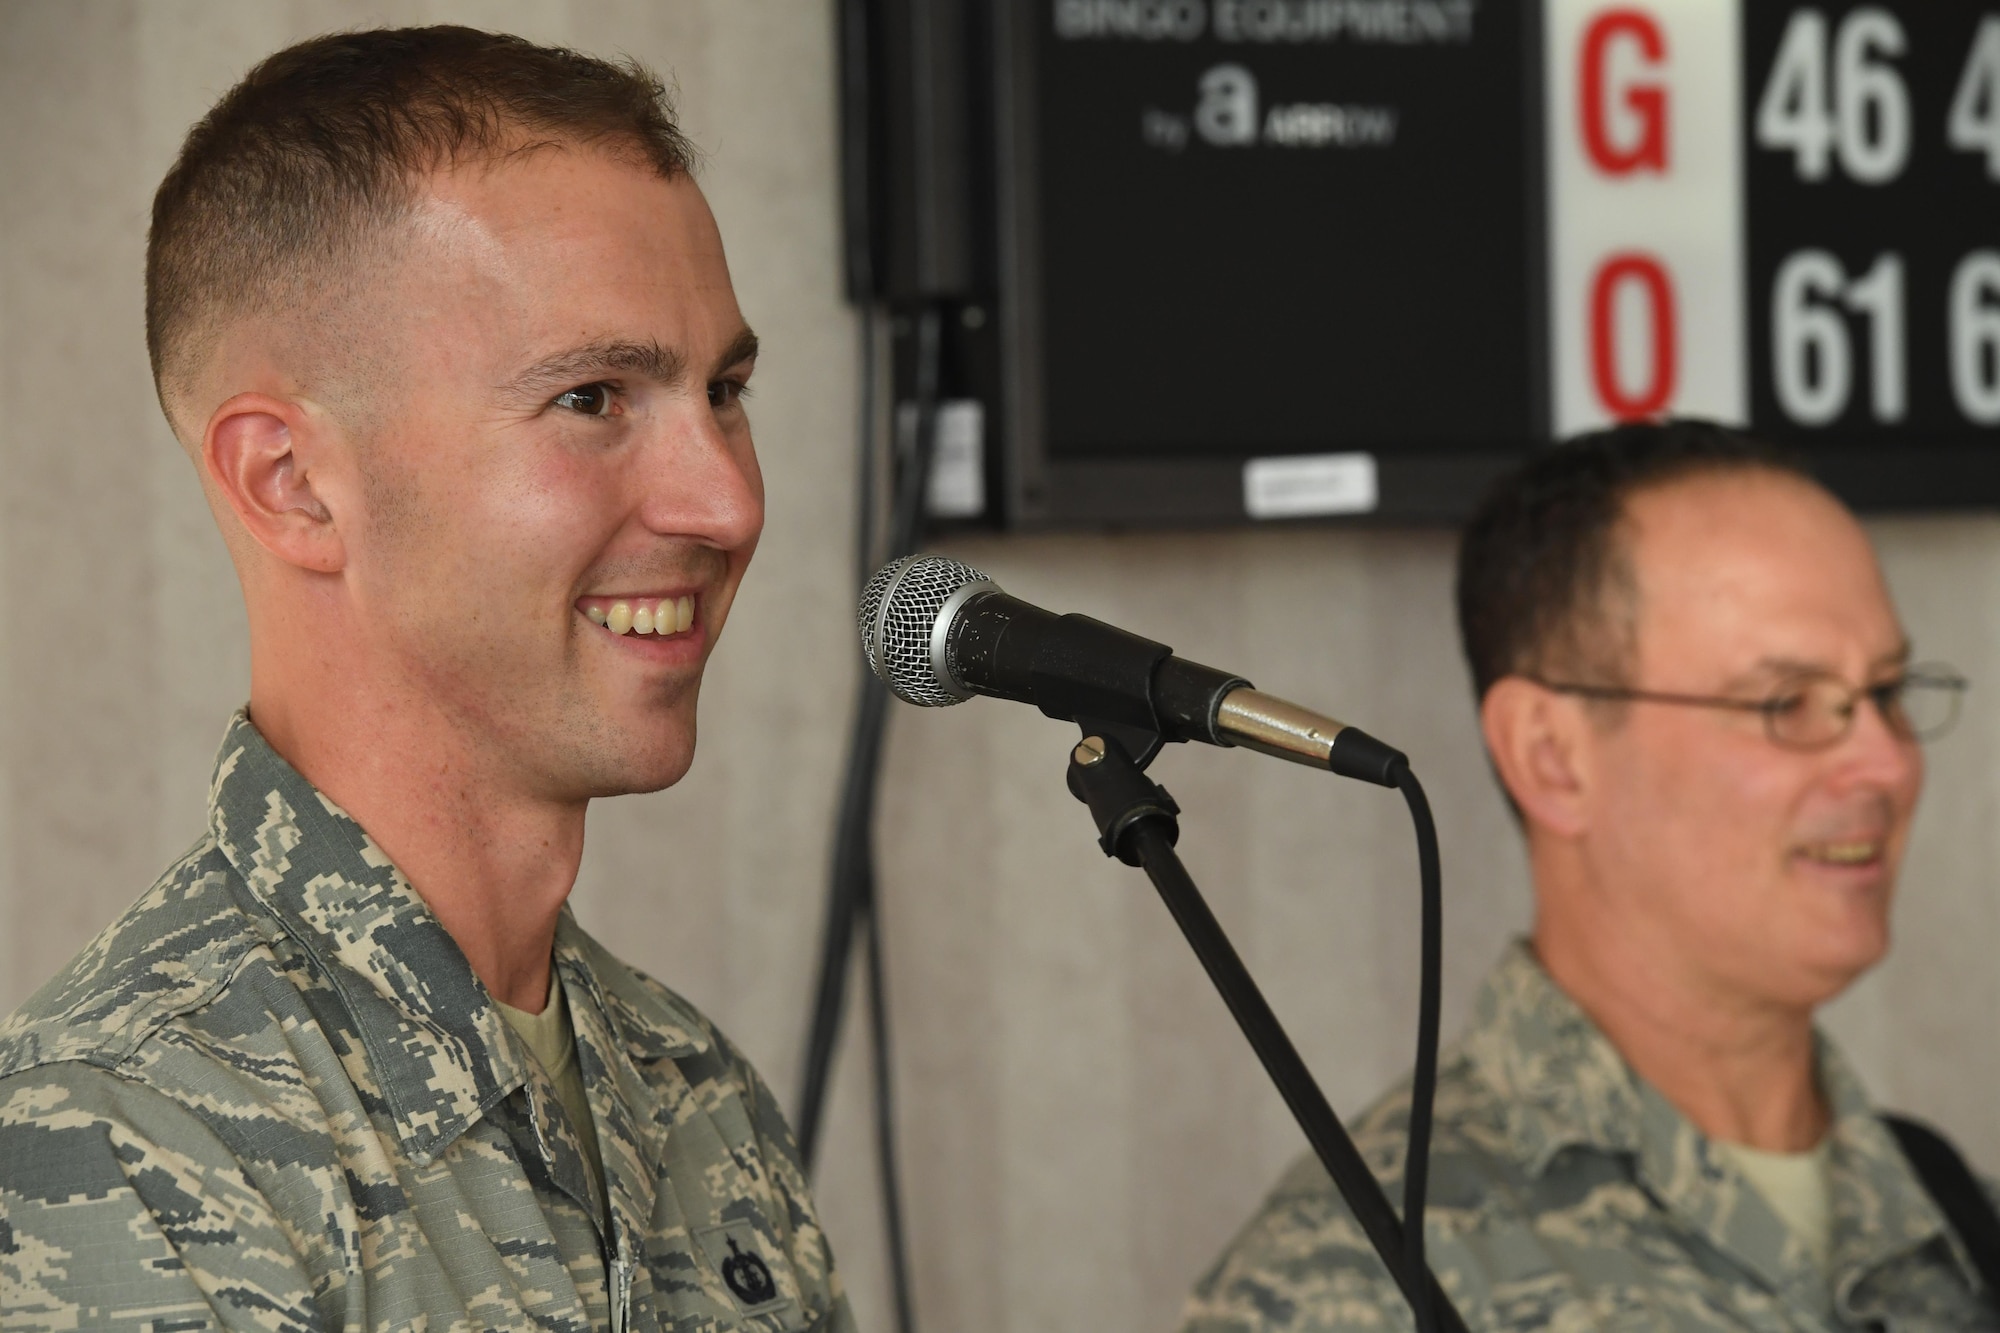 Staff Sgt. Ryan Rager, a keyboard player and vocalist with the U.S. Air Force Heritage of America Band, entertains the crowd during a holiday concert at the Hampton Veteran’s Medical Center, Jan. 7, 2016. Rager, a native of South Sioux City, Nebraska, is the tour manager for the Blue Aces rock band, NCO in charge of auditions and a member of the video/audio production staff. (U.S. Air Force photo by Staff Sgt. Nick Wilson)